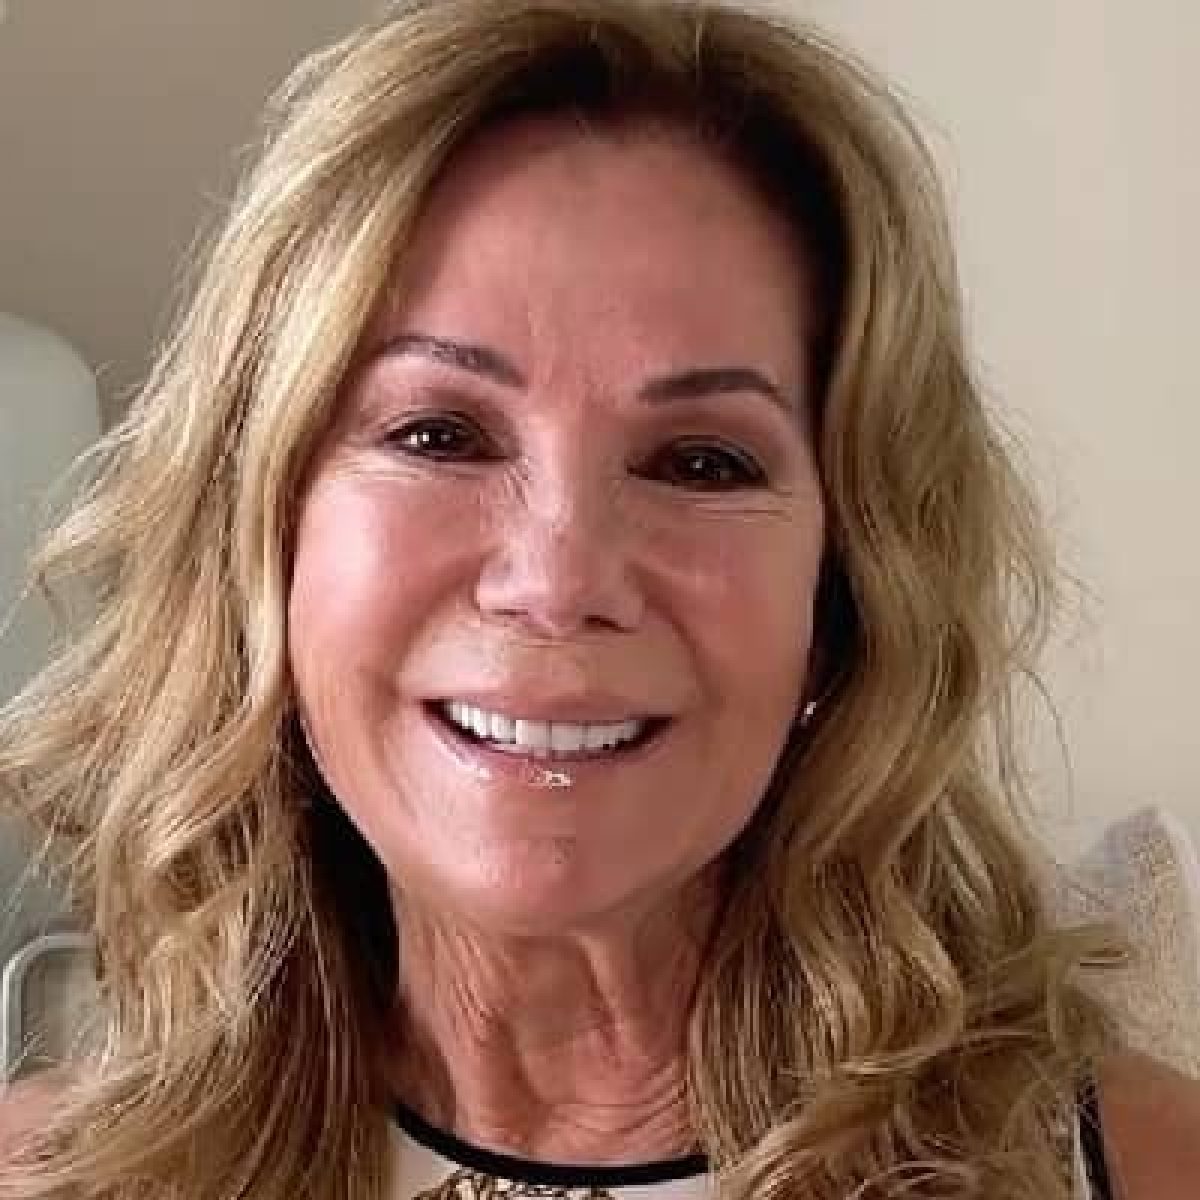 Kathie Lee Gifford - Bio, Age, Net Worth, Height, Married, Facts